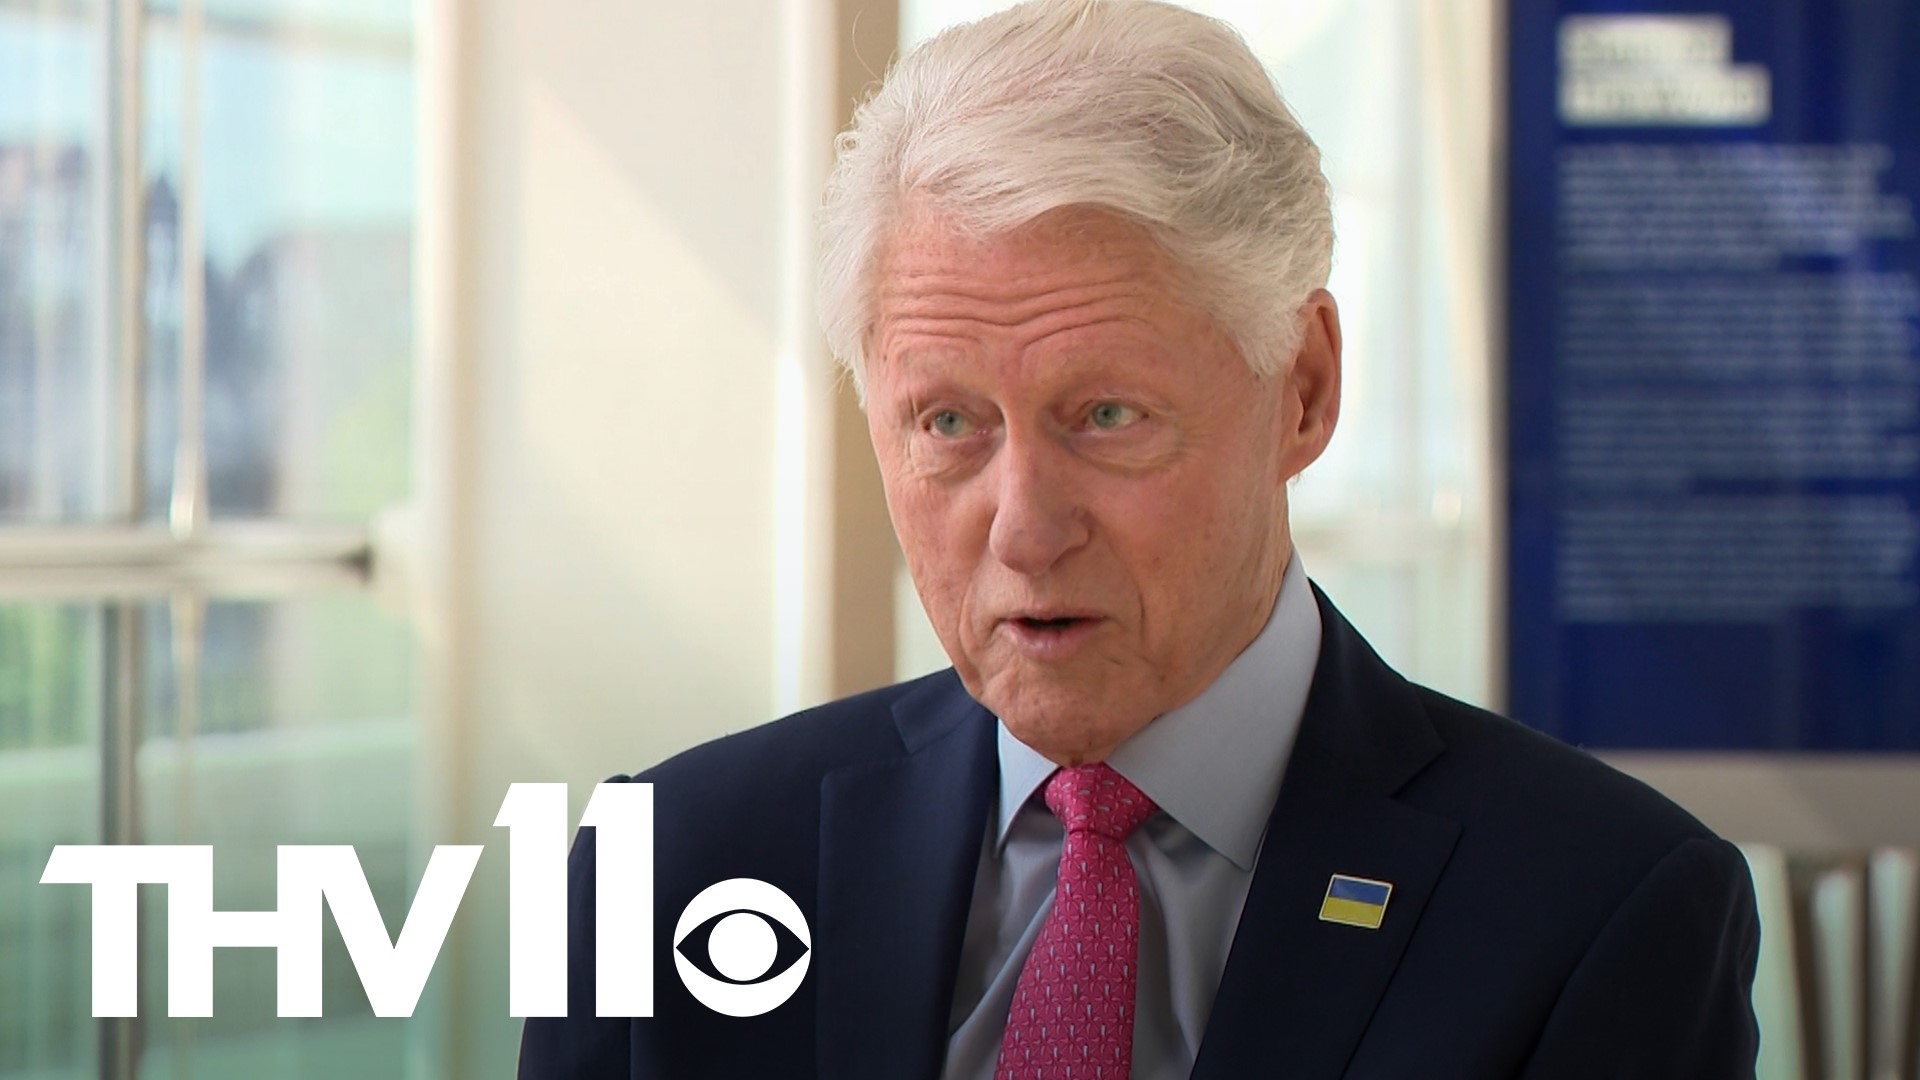 Former President Bill Clinton sat down with THV11's Craig O'Neill to chat about Arkansas politics, the conflict in Ukraine, and the Clinton School of Public Service.